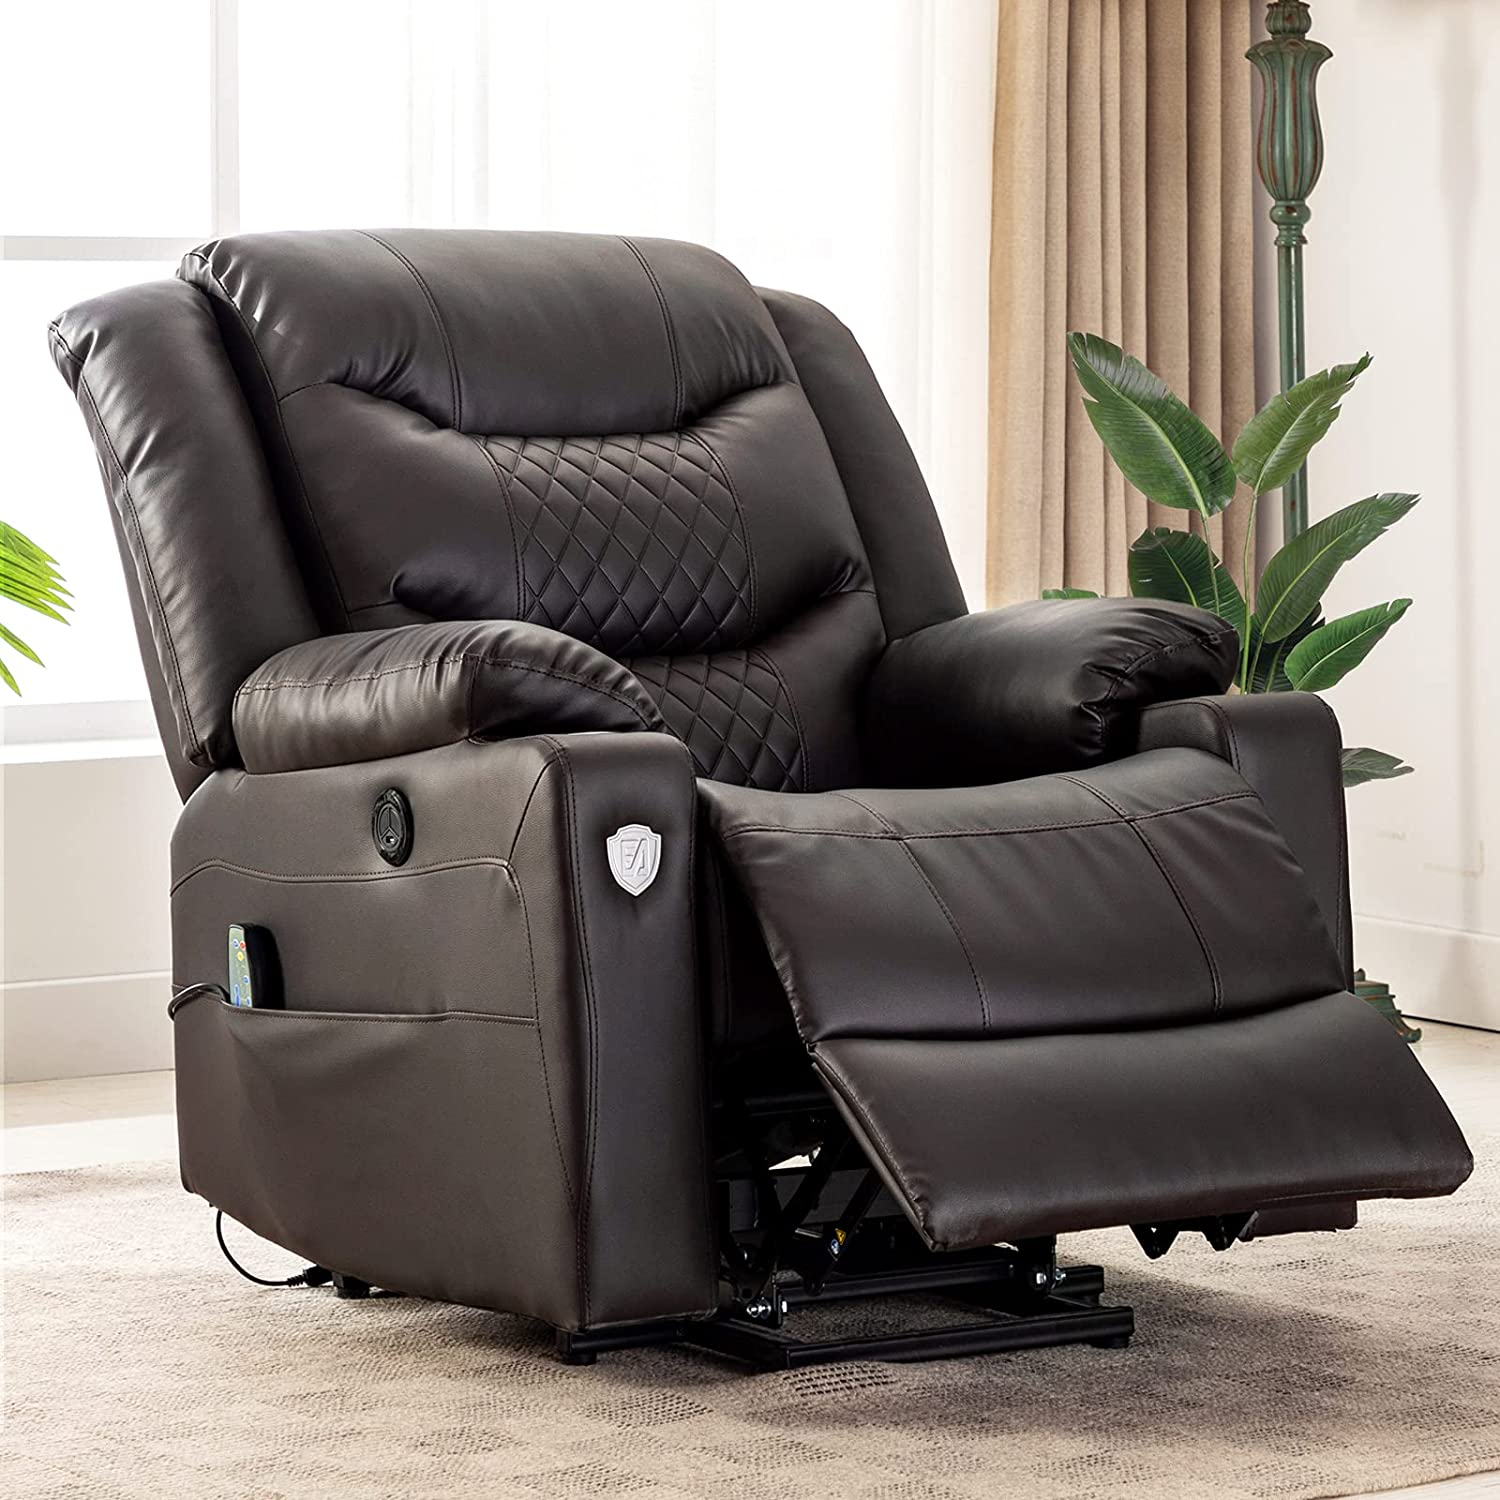 What Is A Lift Chair Recliner